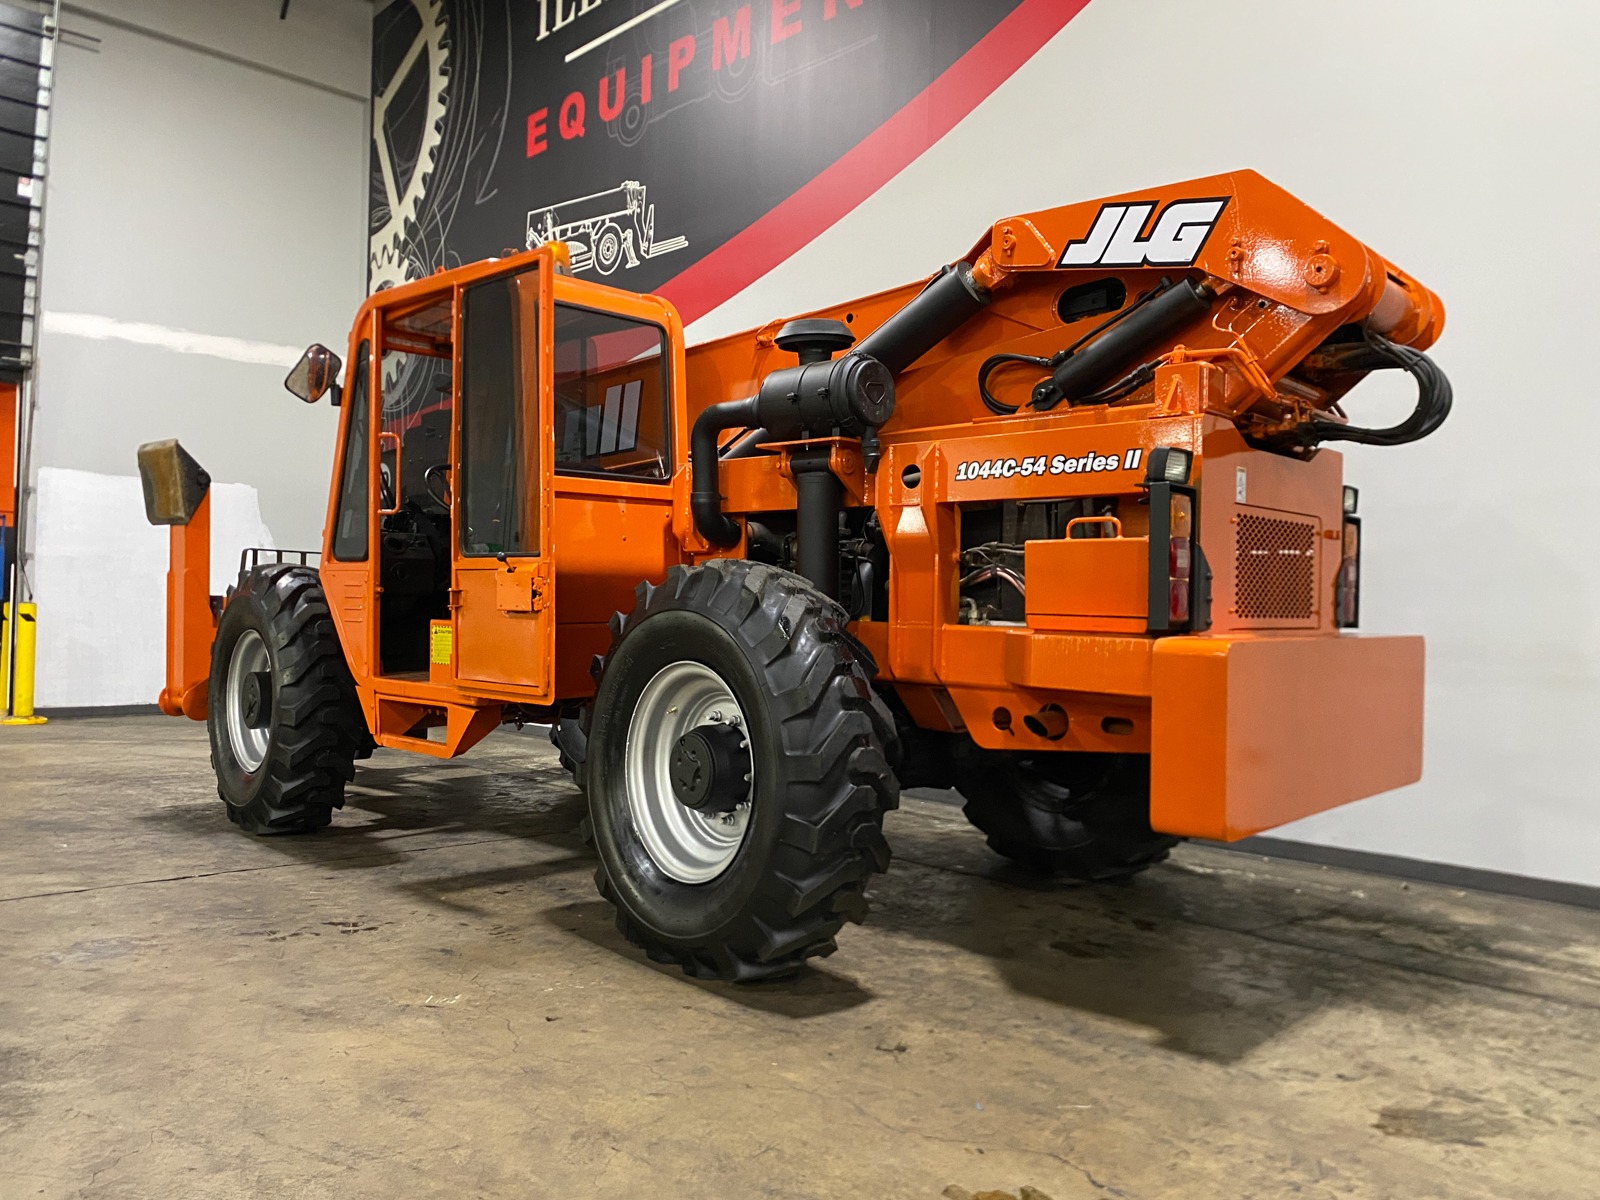 Used 2014 LULL 1044C-54 W/CAB  | Cary, IL